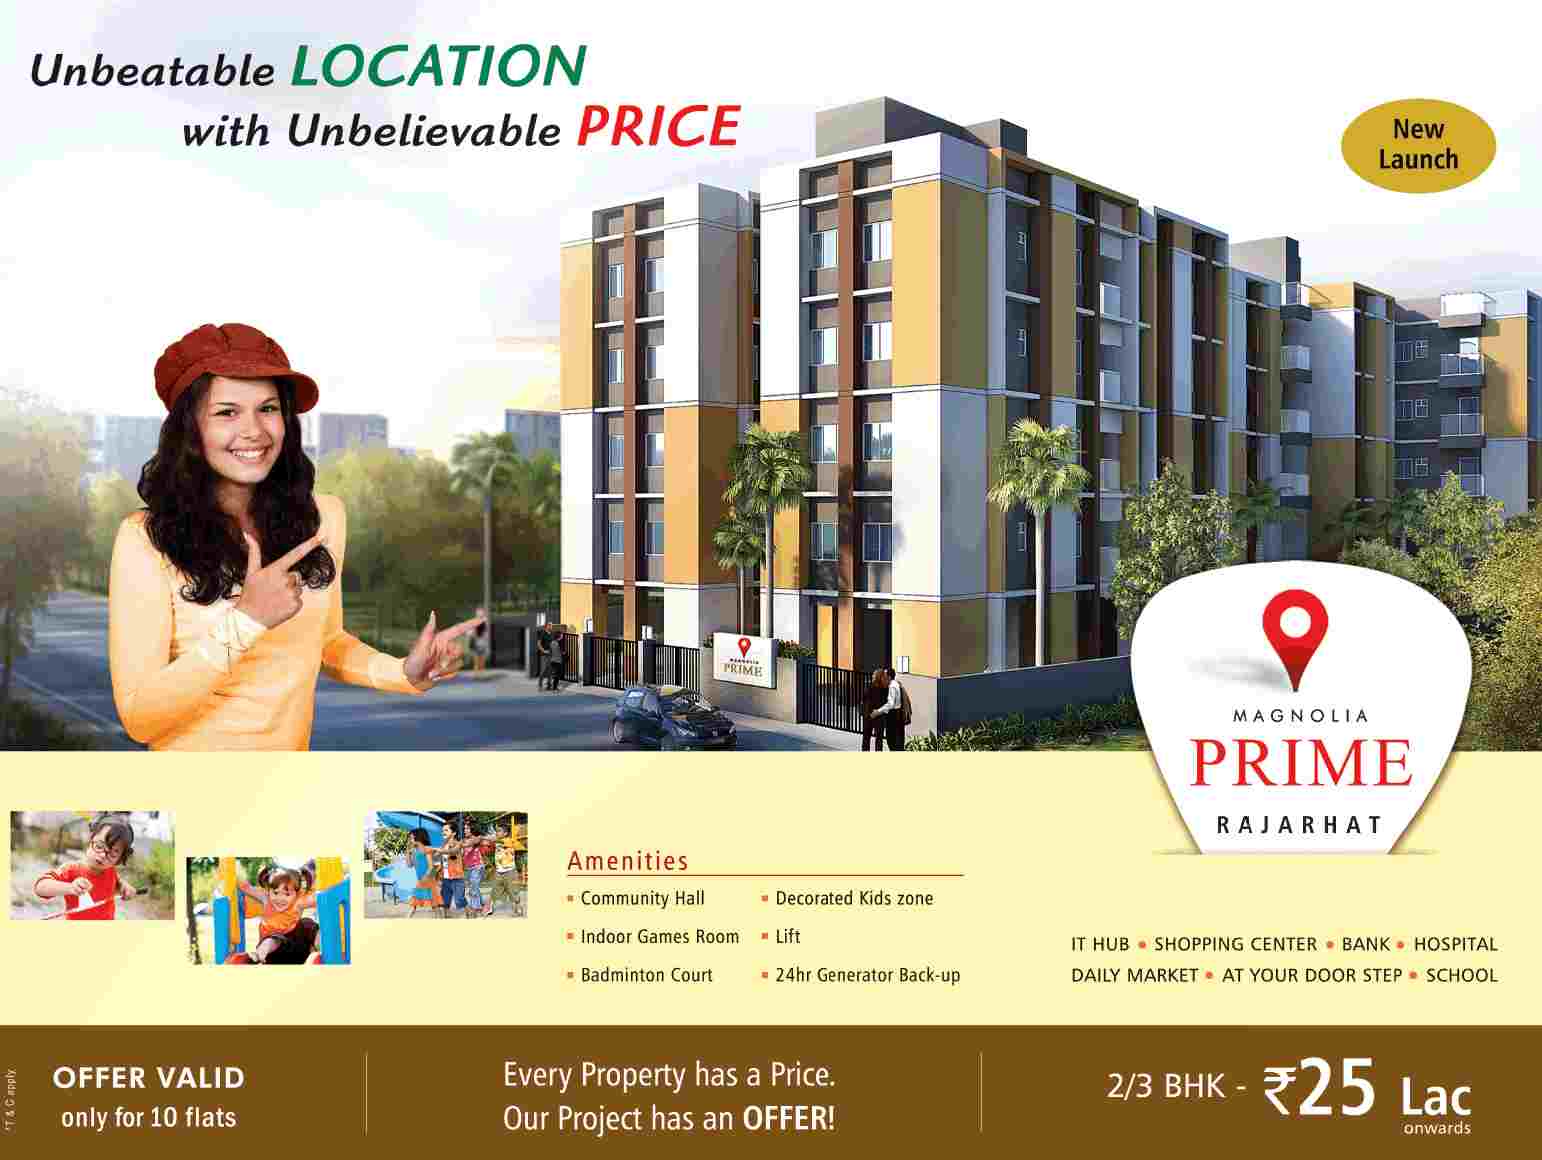 Live in unbeatable location with an unbelievable price at Magnolia Prime in Kolkata